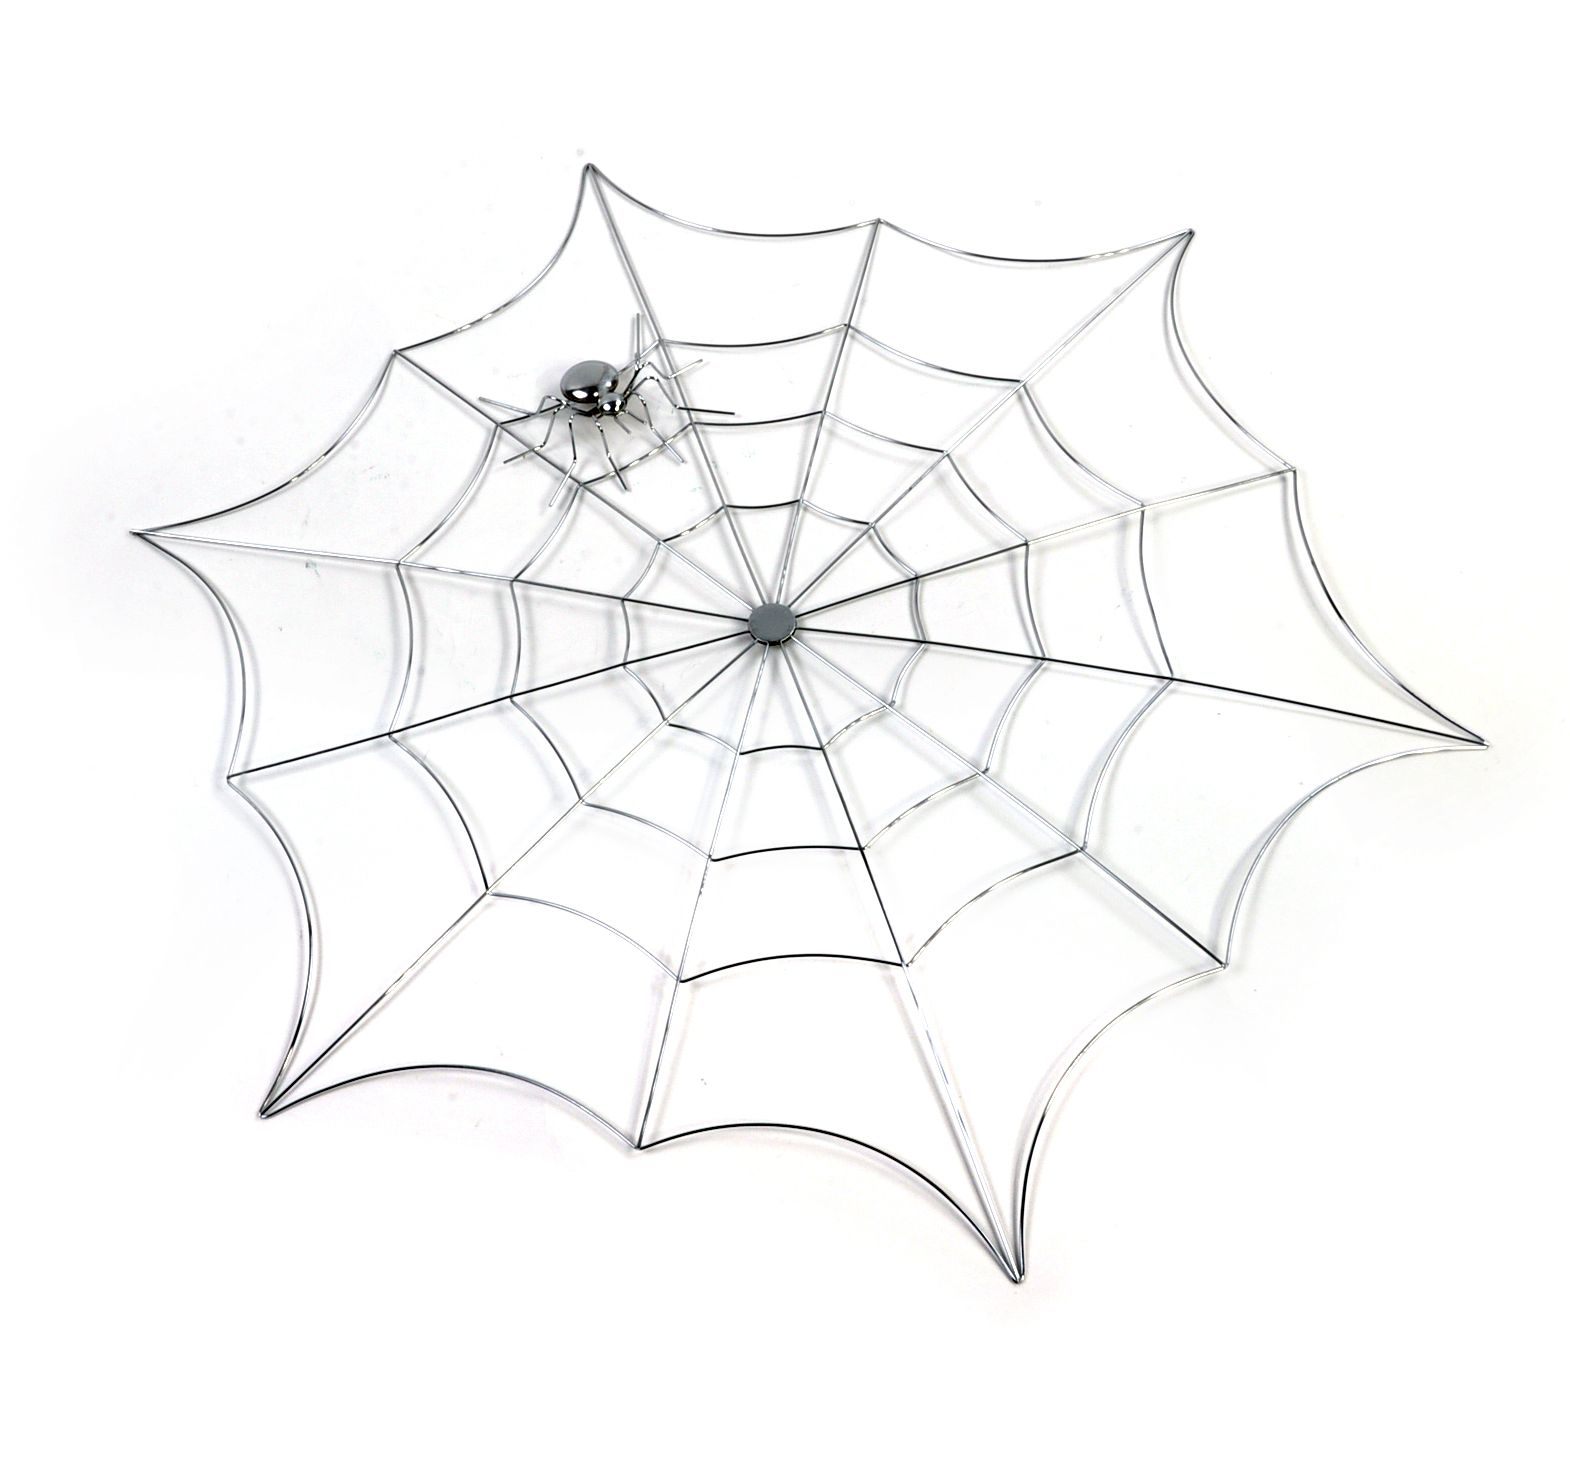 /spider And Web – 21" / 53cm Metal Wall Decor | Pink Cat Shop In Recent Web Wall Art (View 14 of 20)